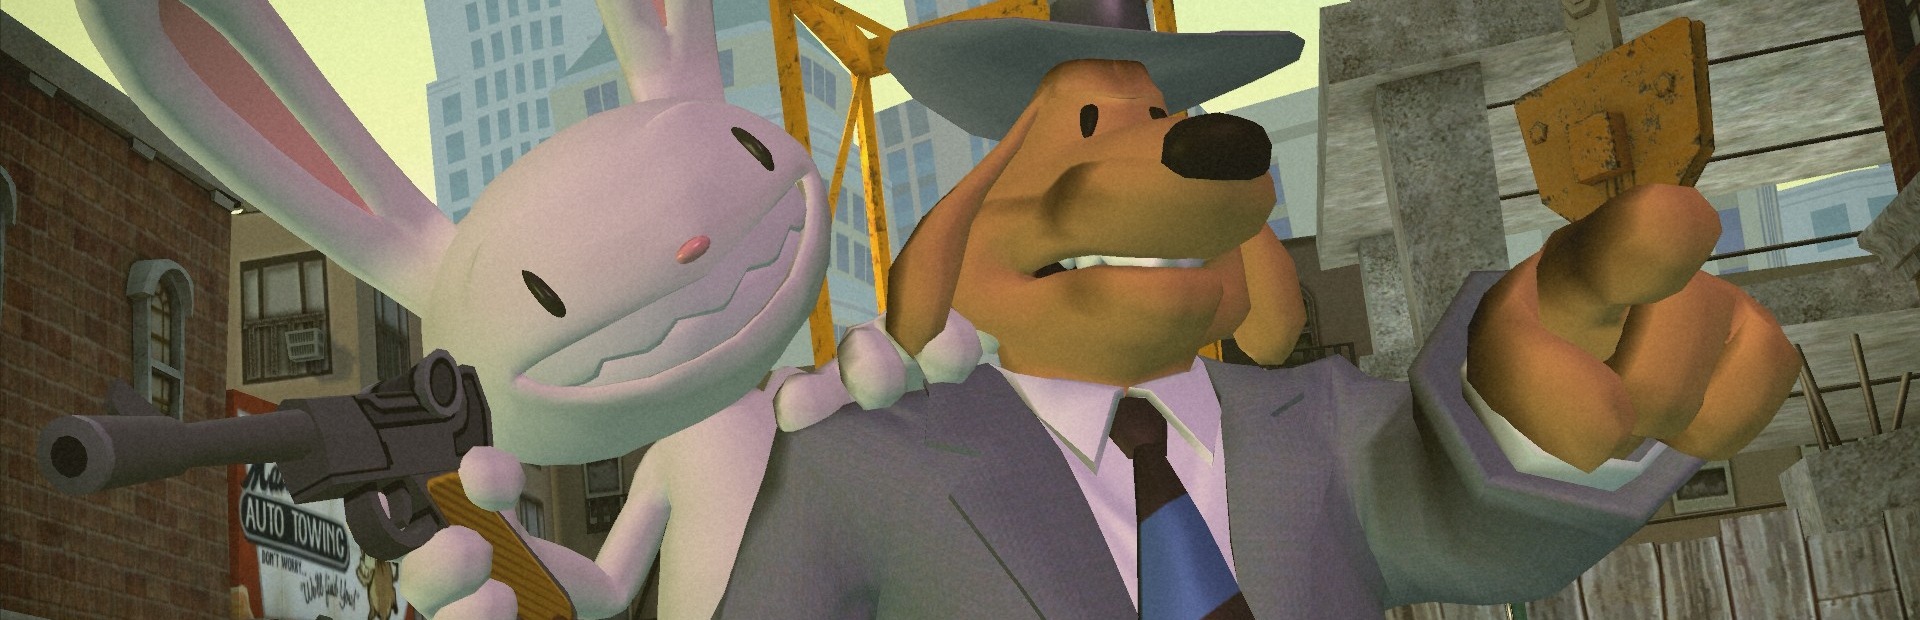 Sam & Max Complete Pack